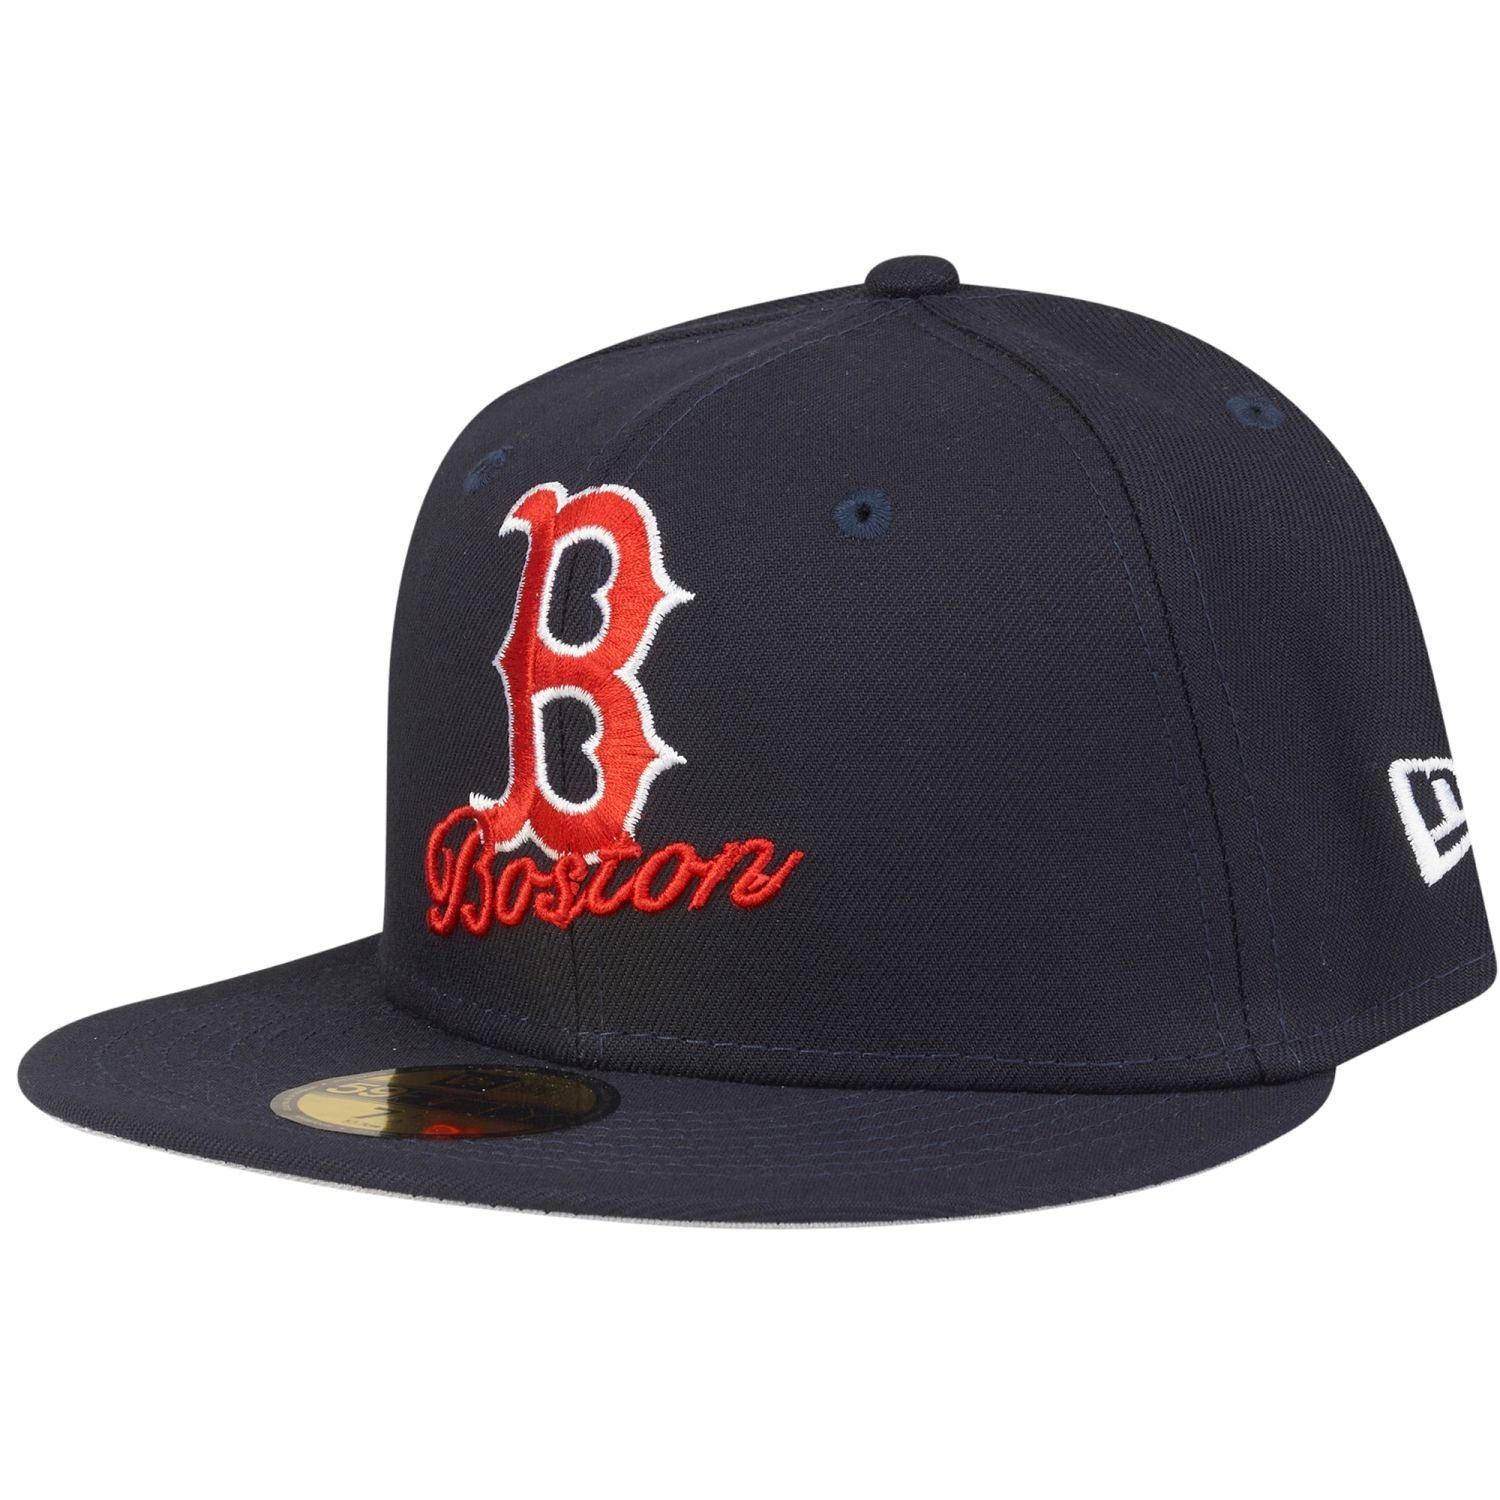 New Era Fitted Cap 59Fifty DUAL LOGO Boston Red Sox